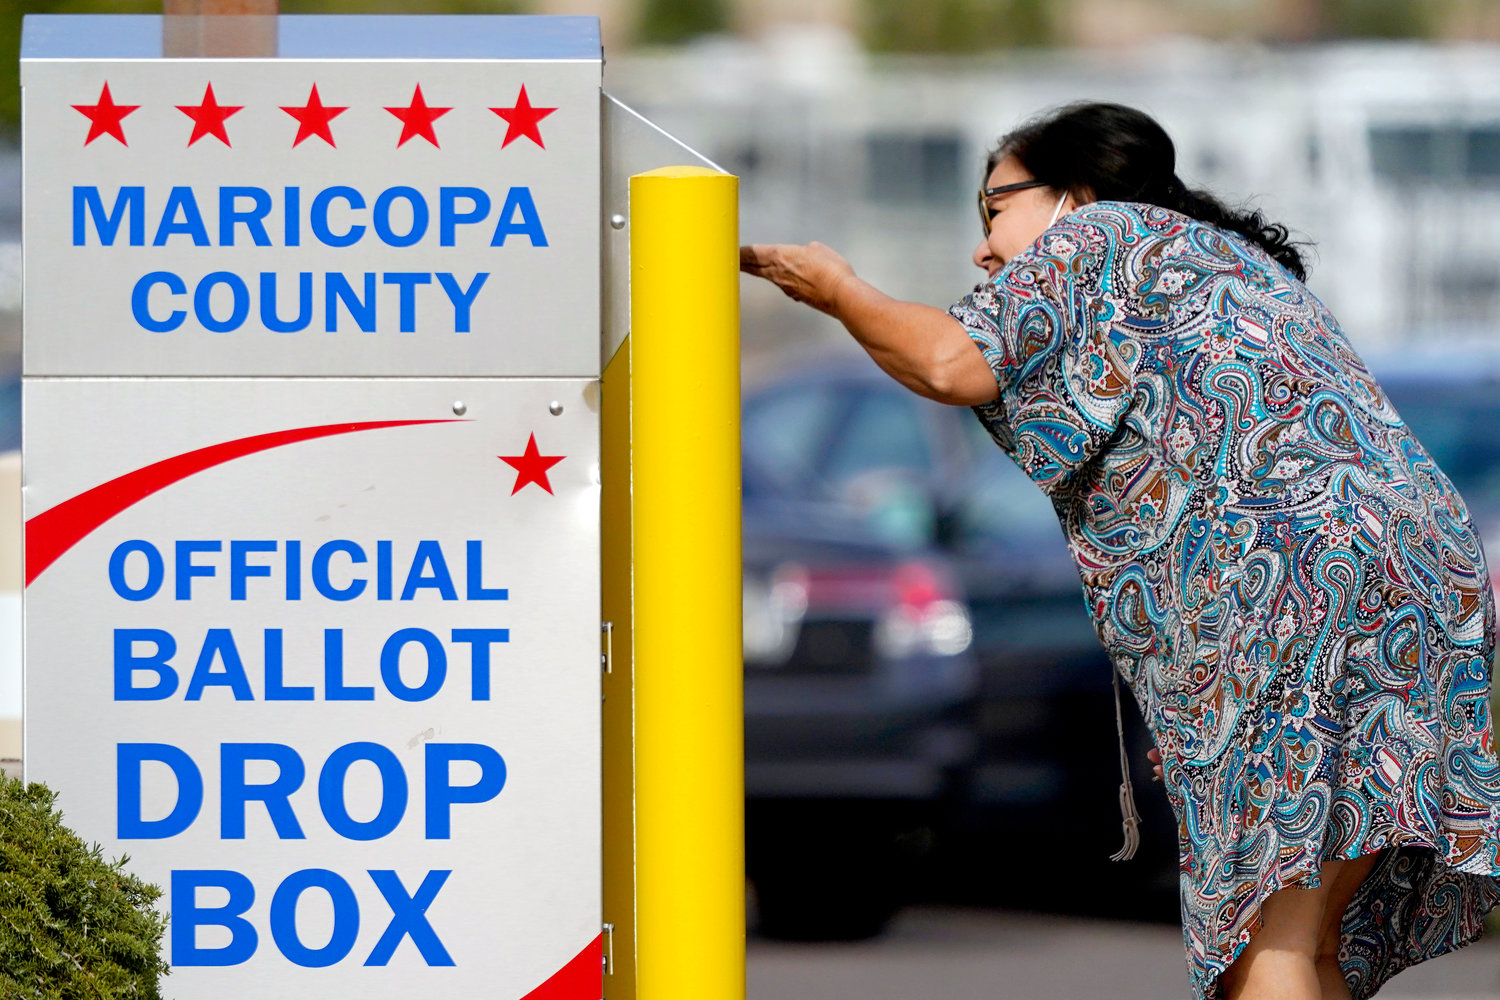 A voter drops off her ballot at a drop box, Nov. 7, in Mesa, Ariz. Fears of aggressive poll watchers sowing chaos at polling stations or conservative groups trying to intimidate votes didn’t materialize on Election Day as many election officials and voting rights experts had feared. Voting proceeded smoothly across most of the U.S., with a few exceptions of scattered disruptions.